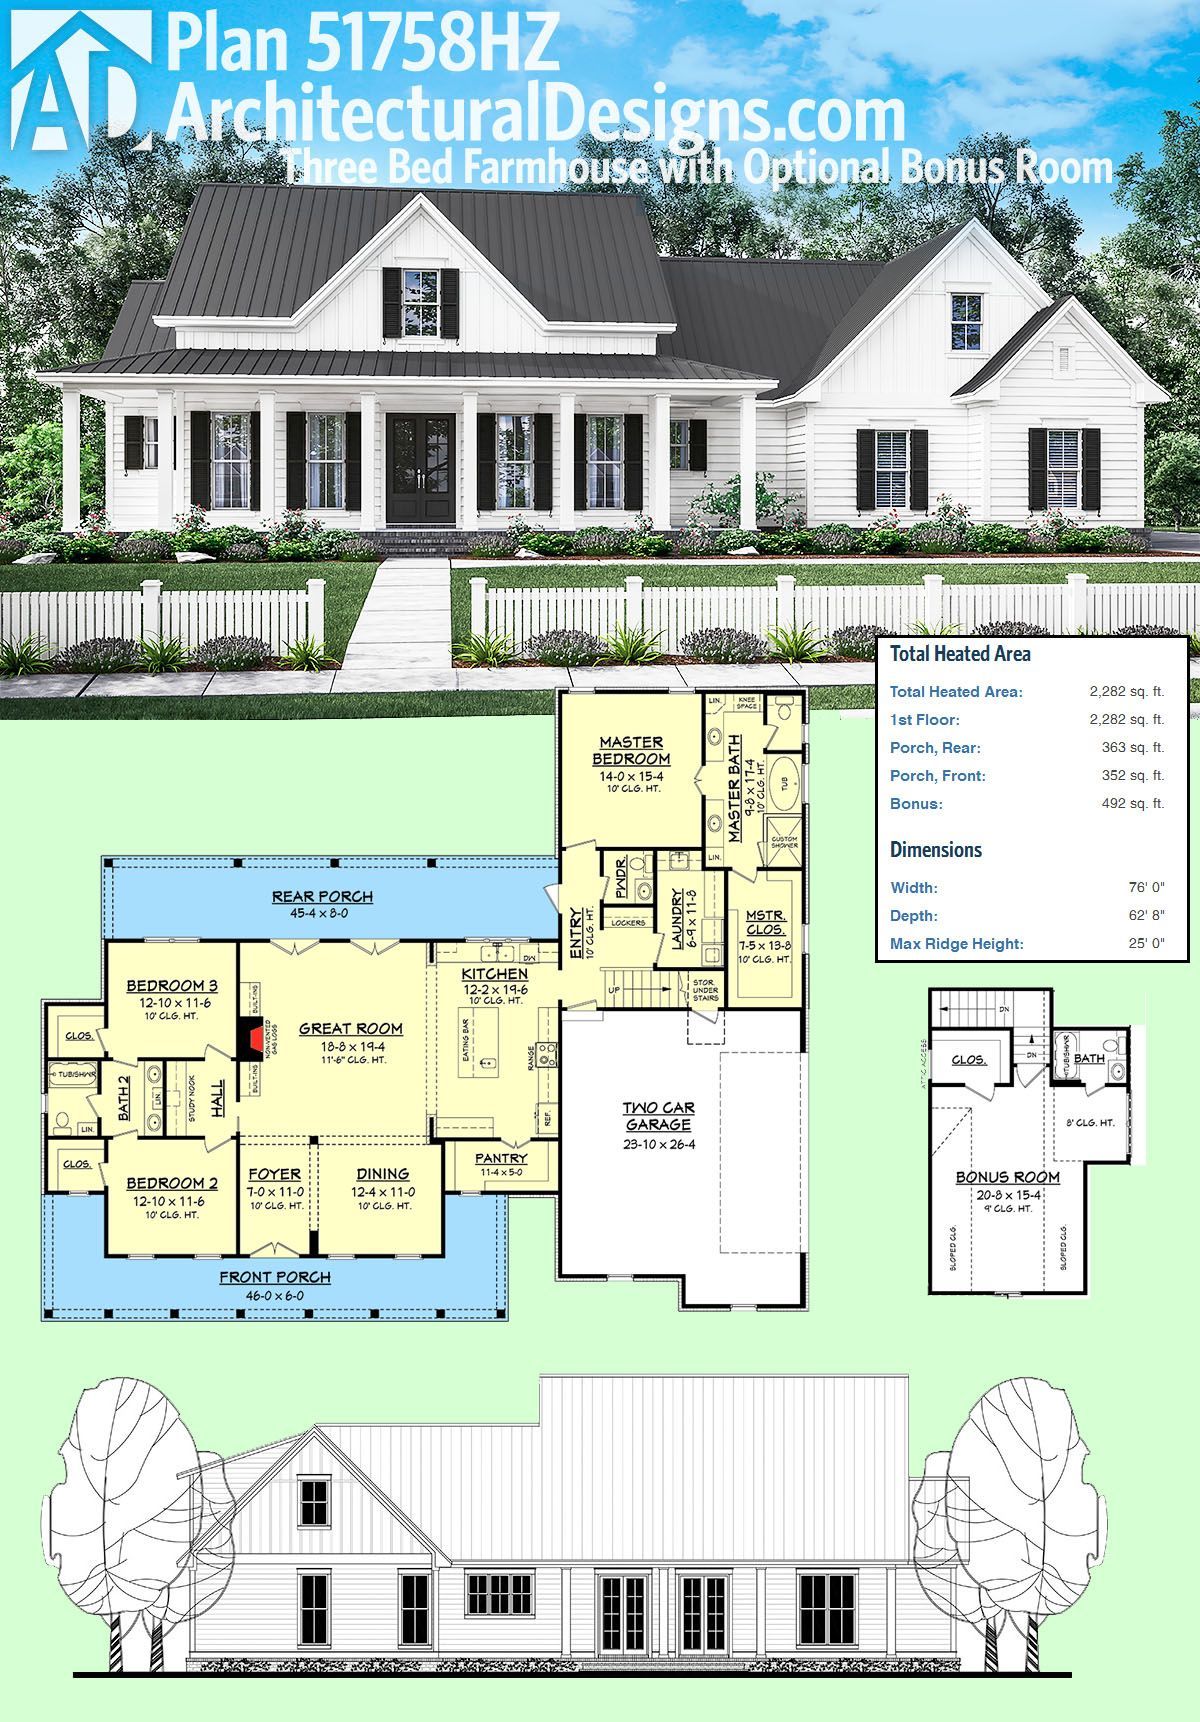 Architectural Designs Plan 51758HZ is a 3 bed farmhouse with an optional bonus roo